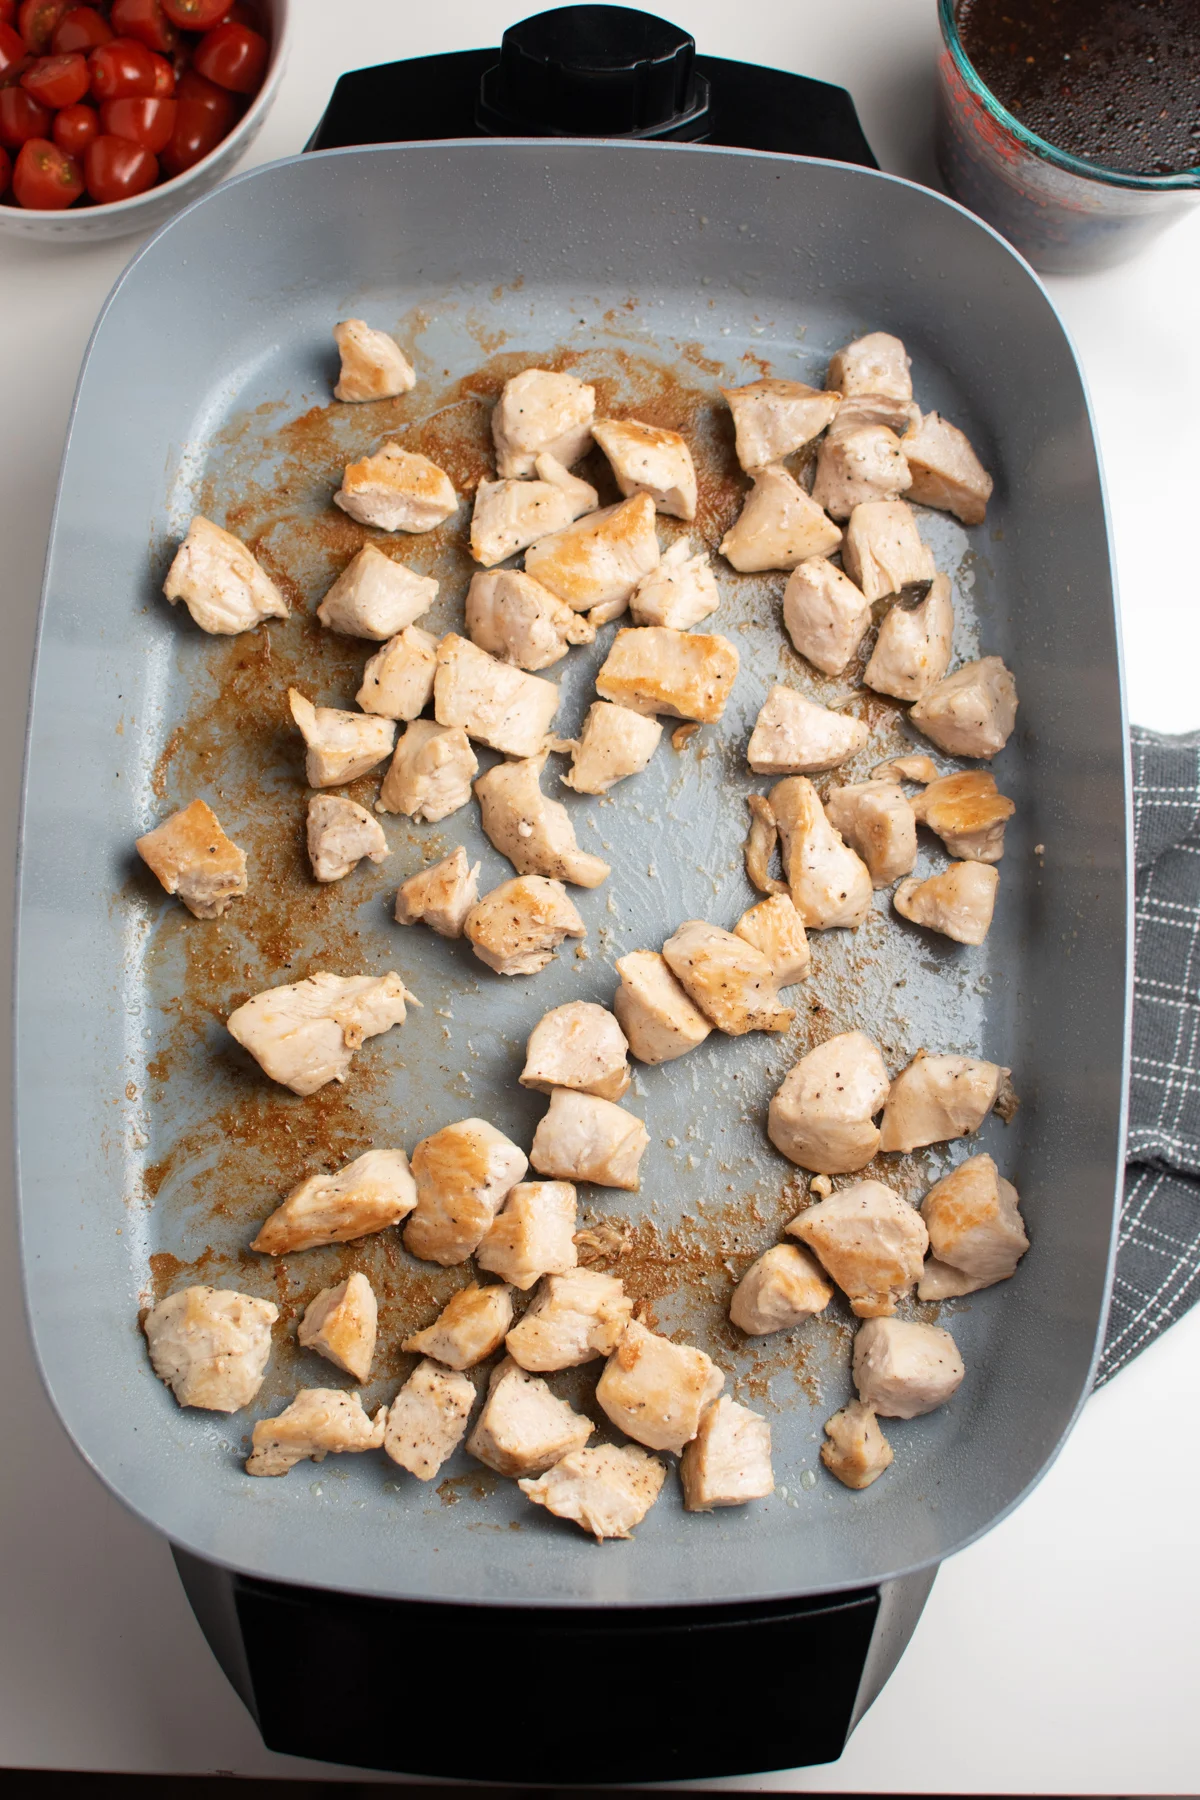 Several pieces of cubed cooked chicken in a skillet on white table.